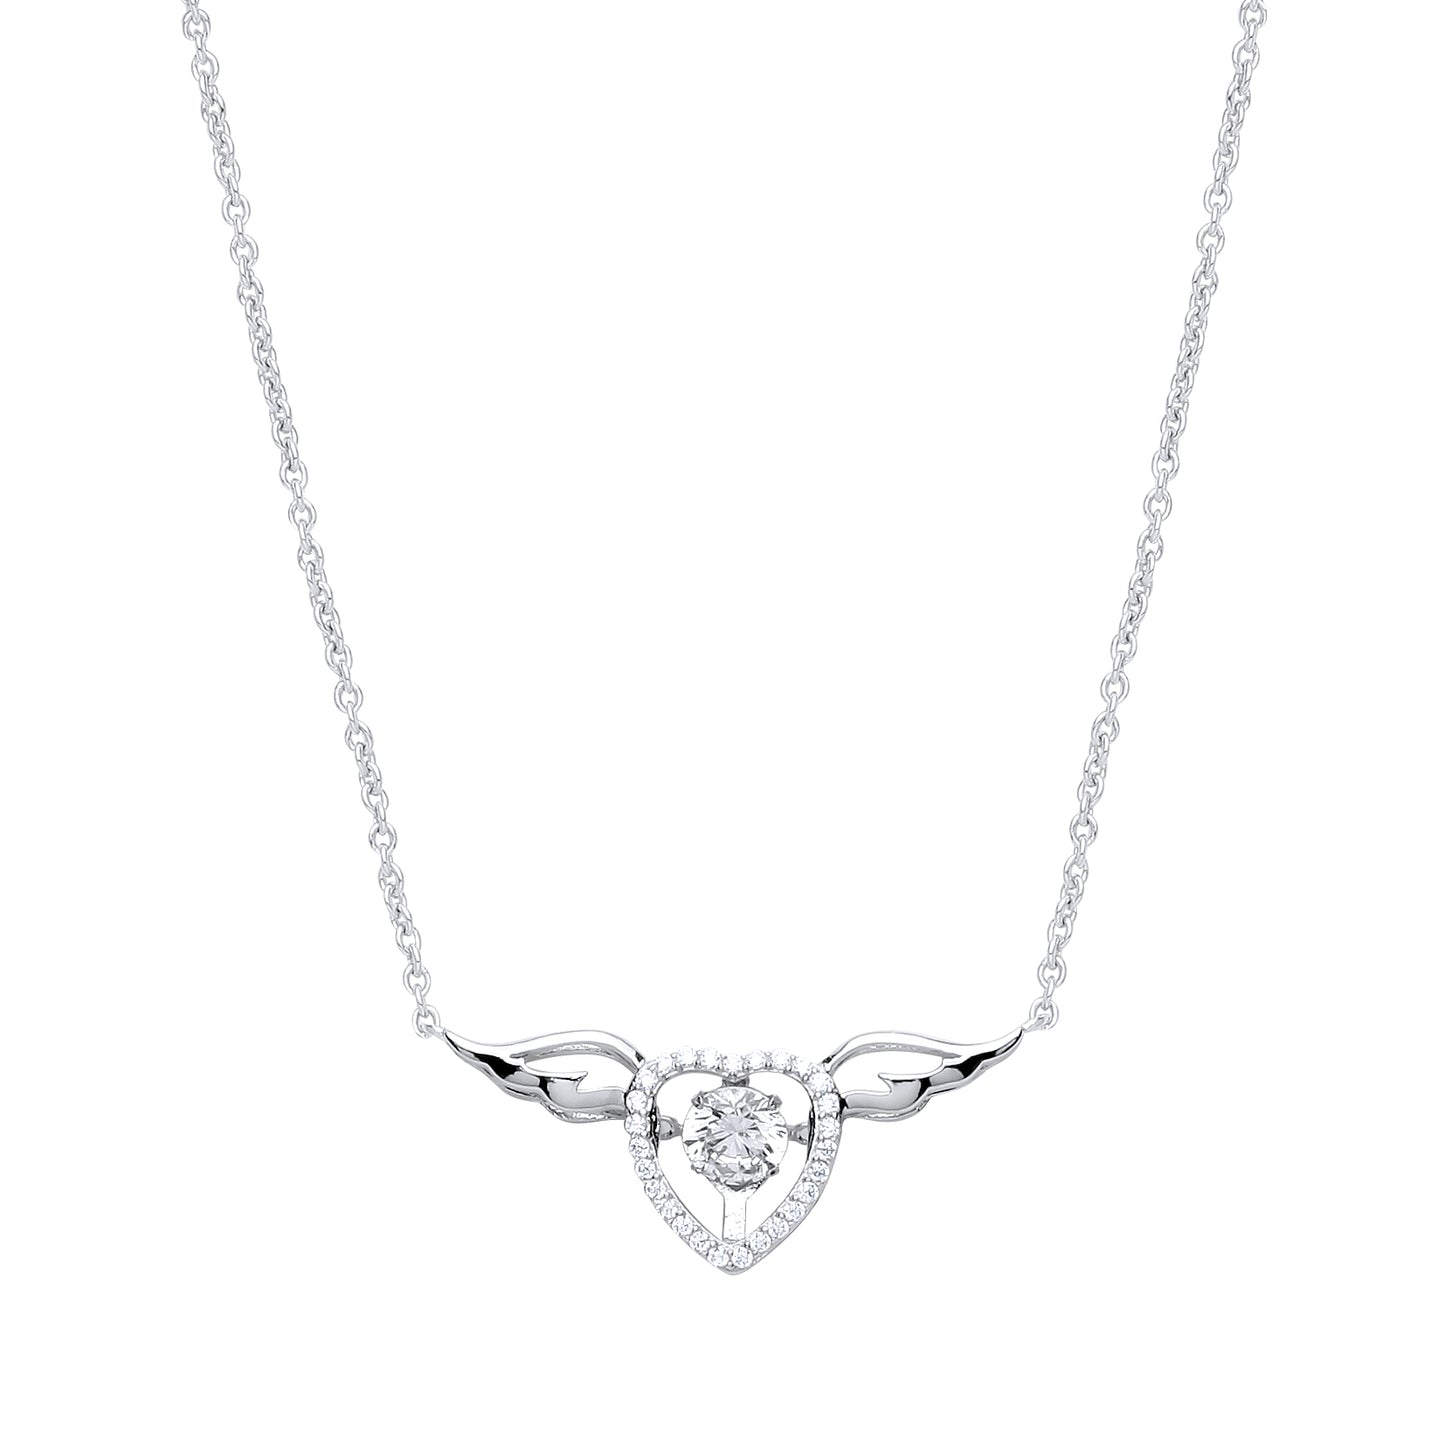 Silver  CZ Love Heart Angel Wings Charm Necklace 15 + 2 inch - GVK238